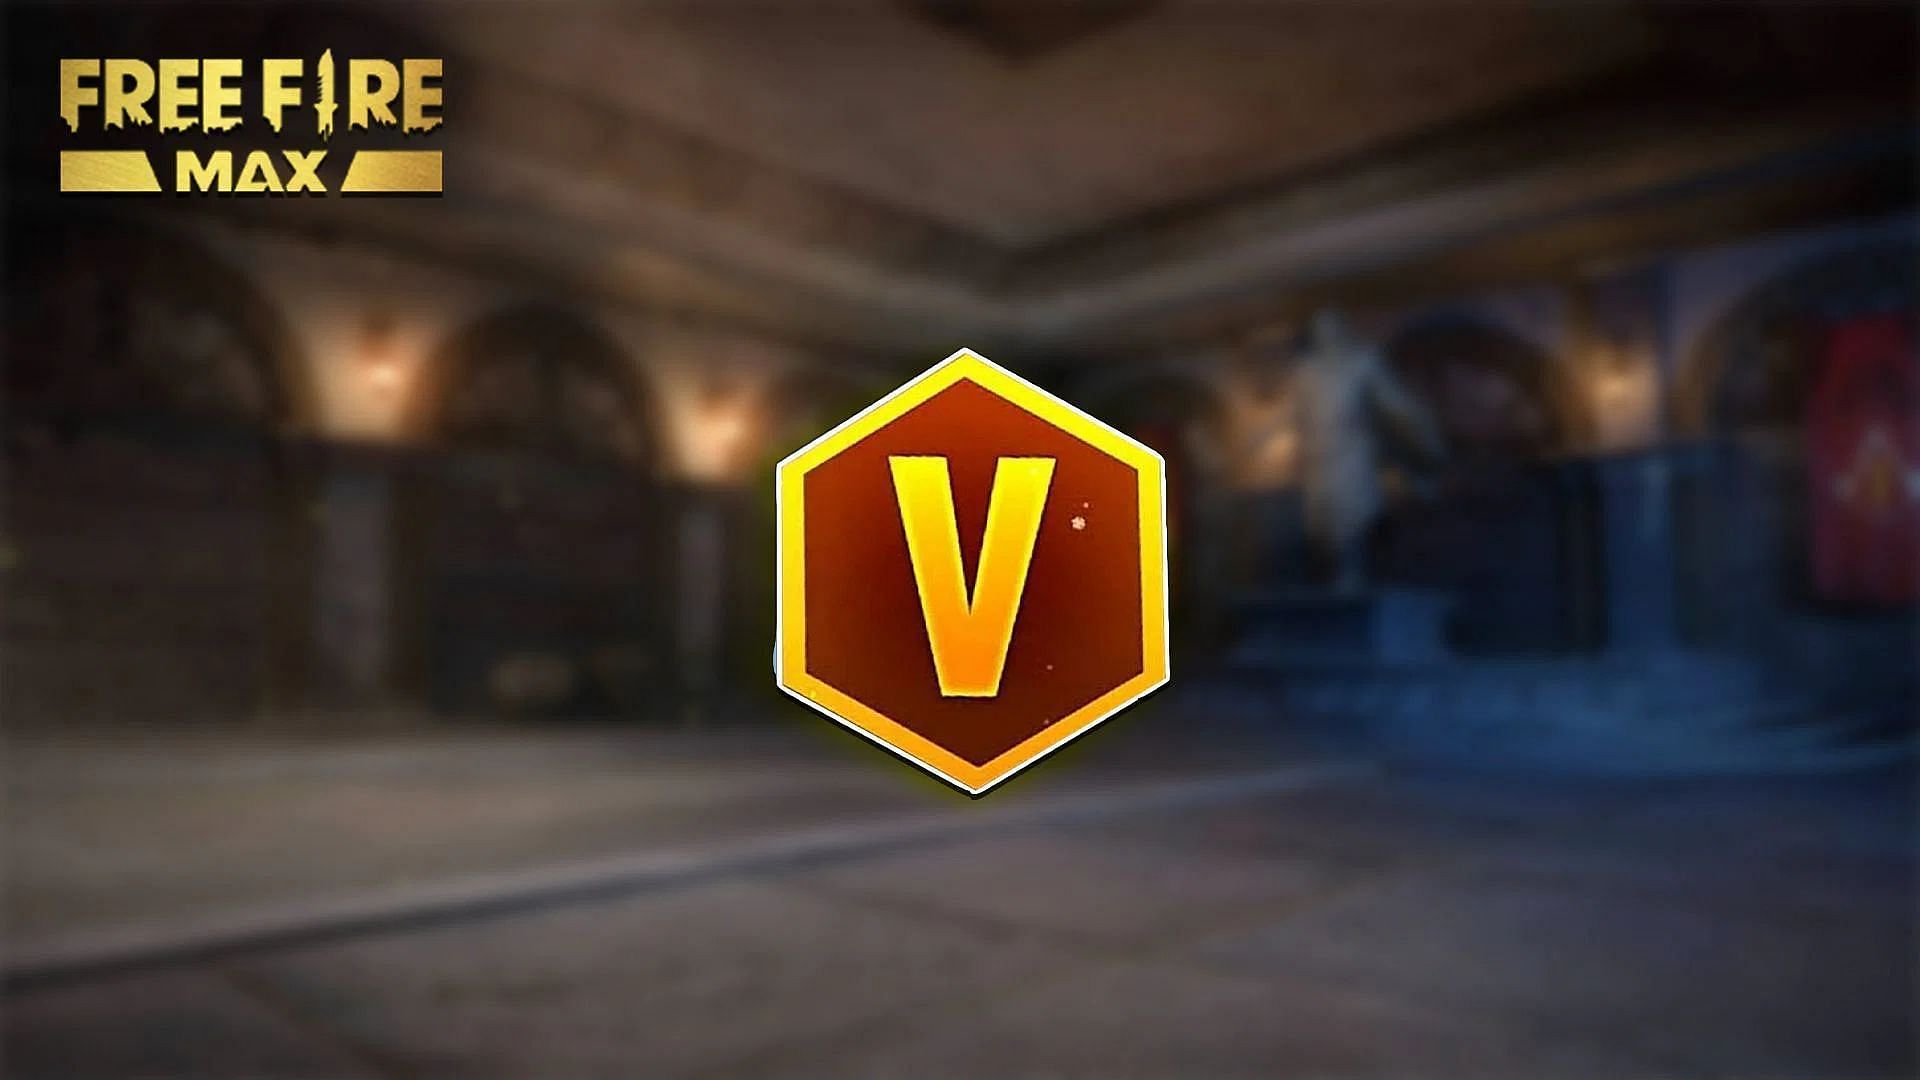 The rarity of the V Badge in the Free Fire MAX Indian server (Image via Sportskeeda)